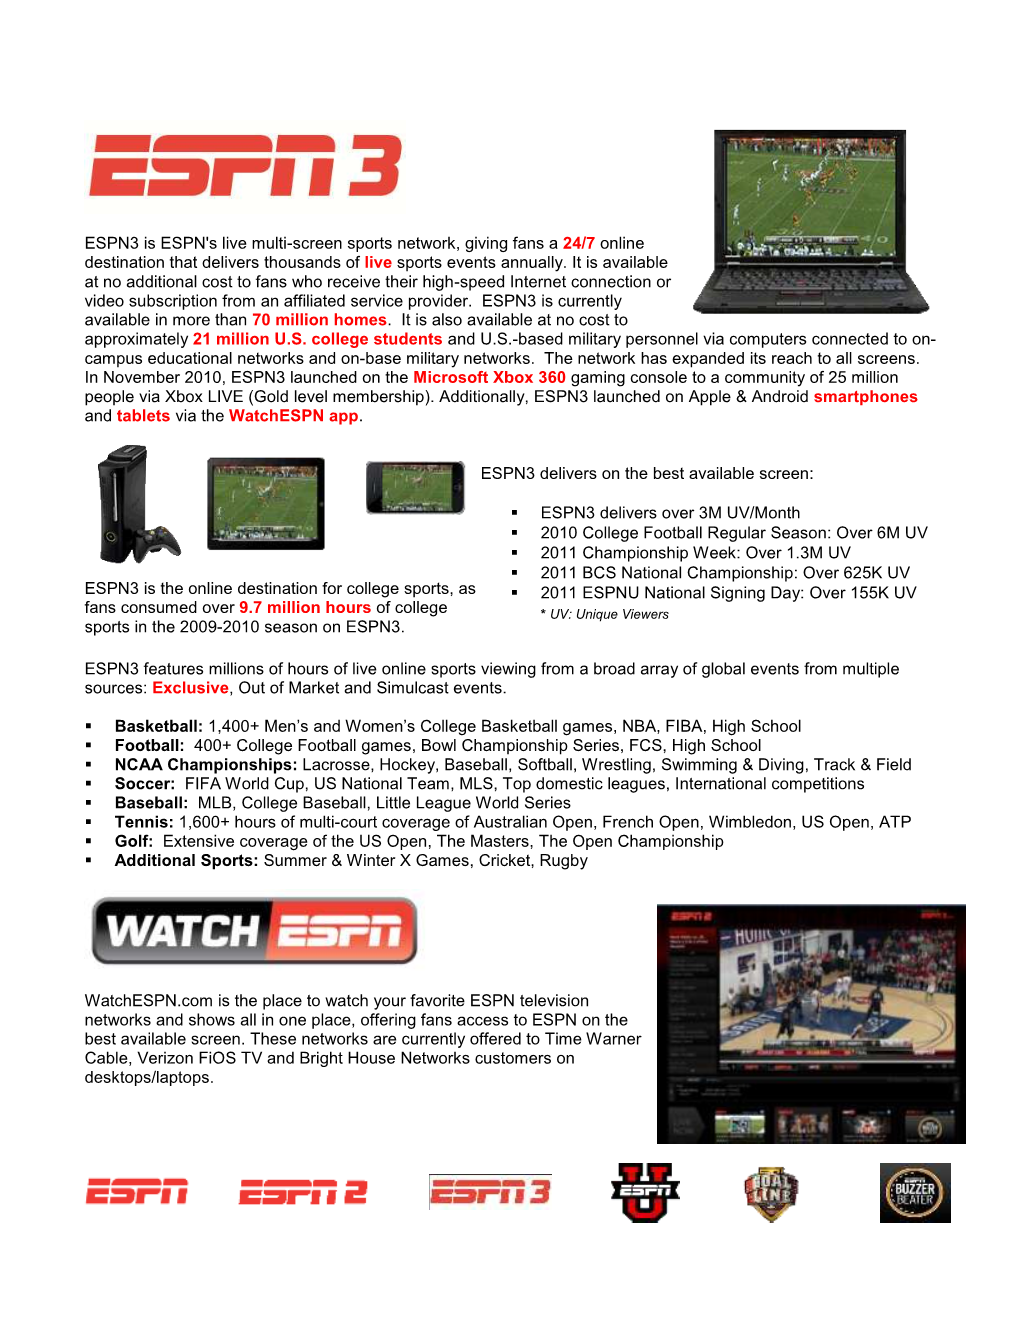 ESPN3 Is ESPN's Live Multi-Screen Sports Network, Giving Fans a 24/7 Online Destination That Delivers Thousands of Live Sports Events Annually